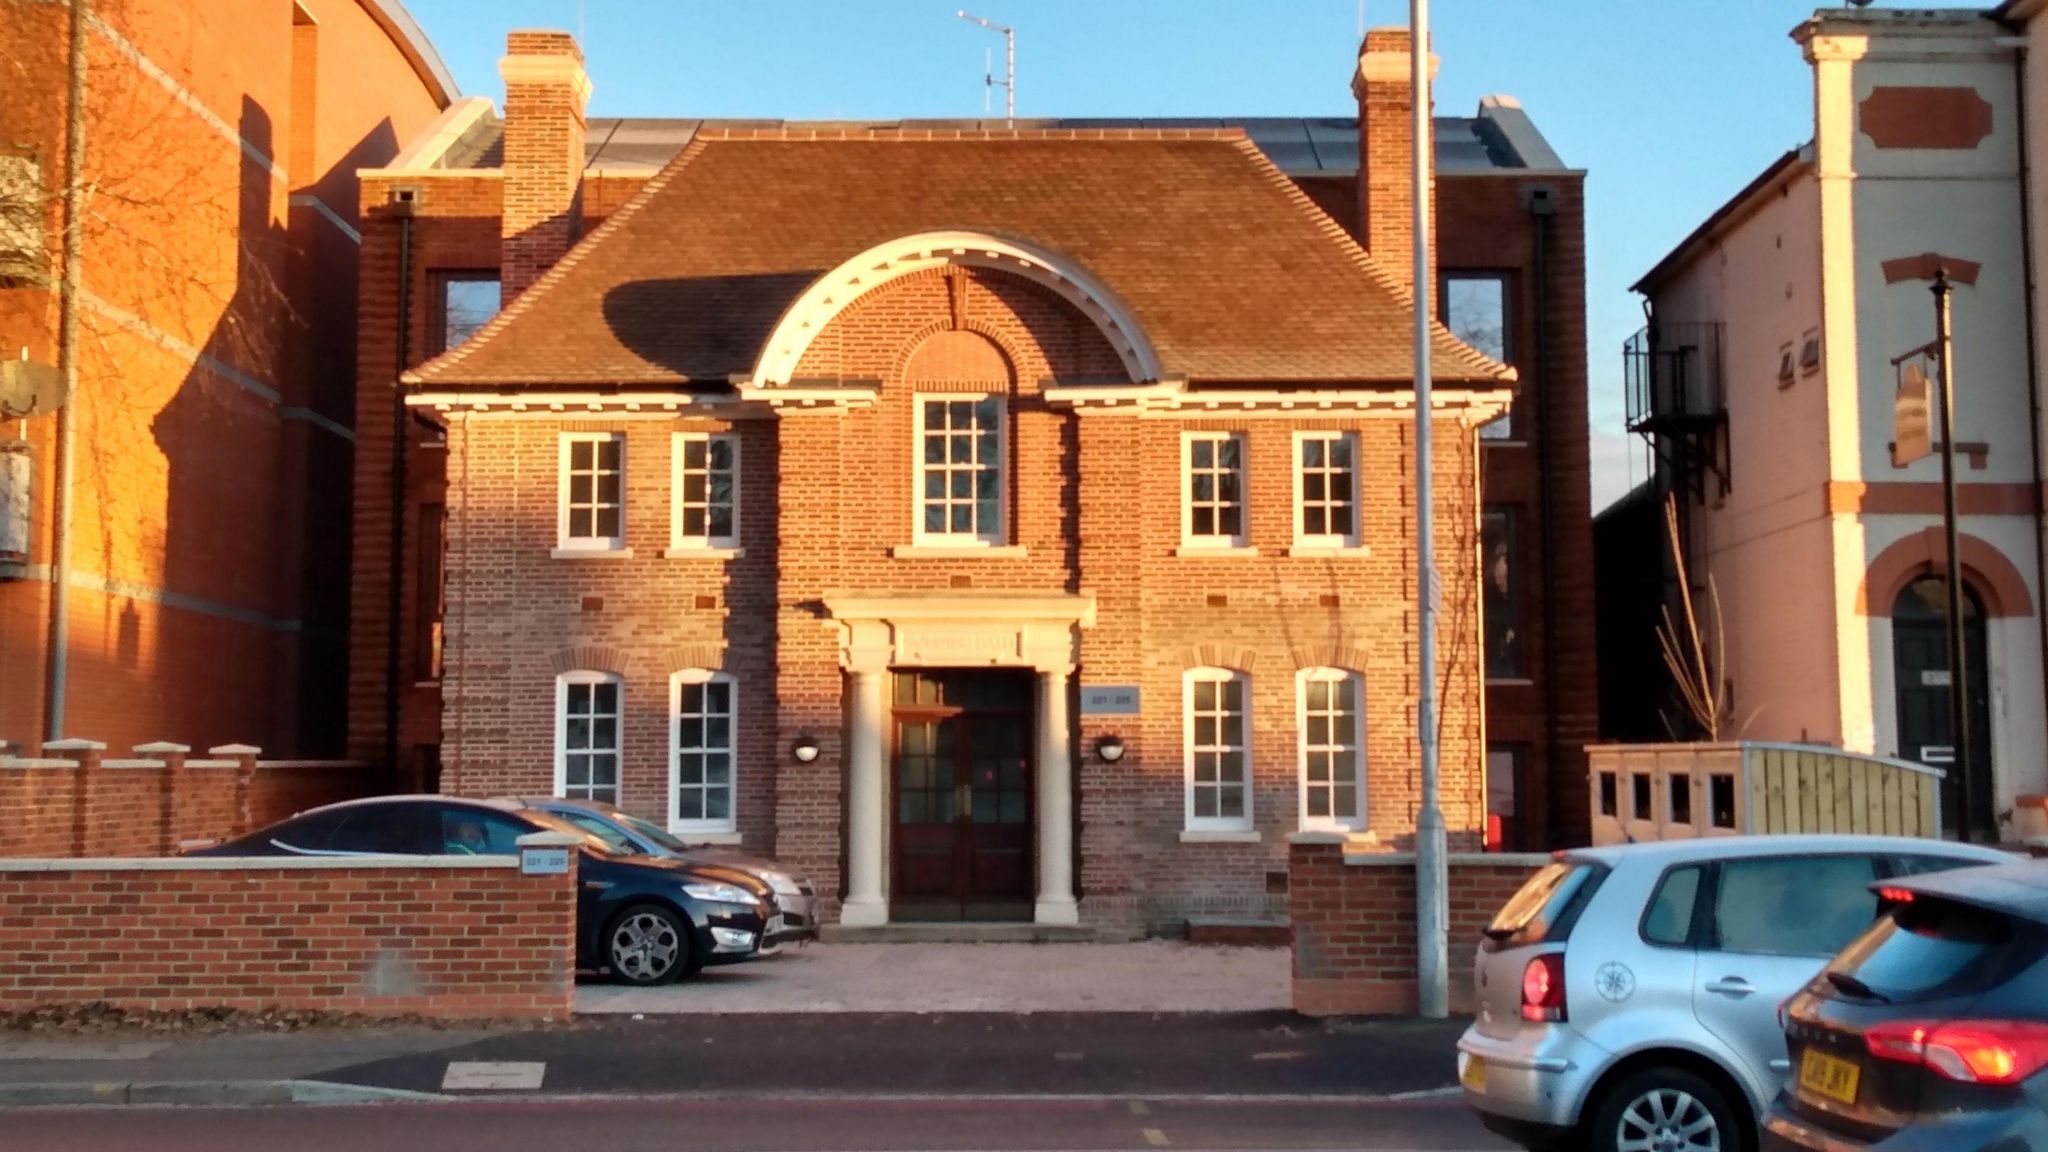 The former Arthur Hill Pool at 221-225 Kings Road, East Reading